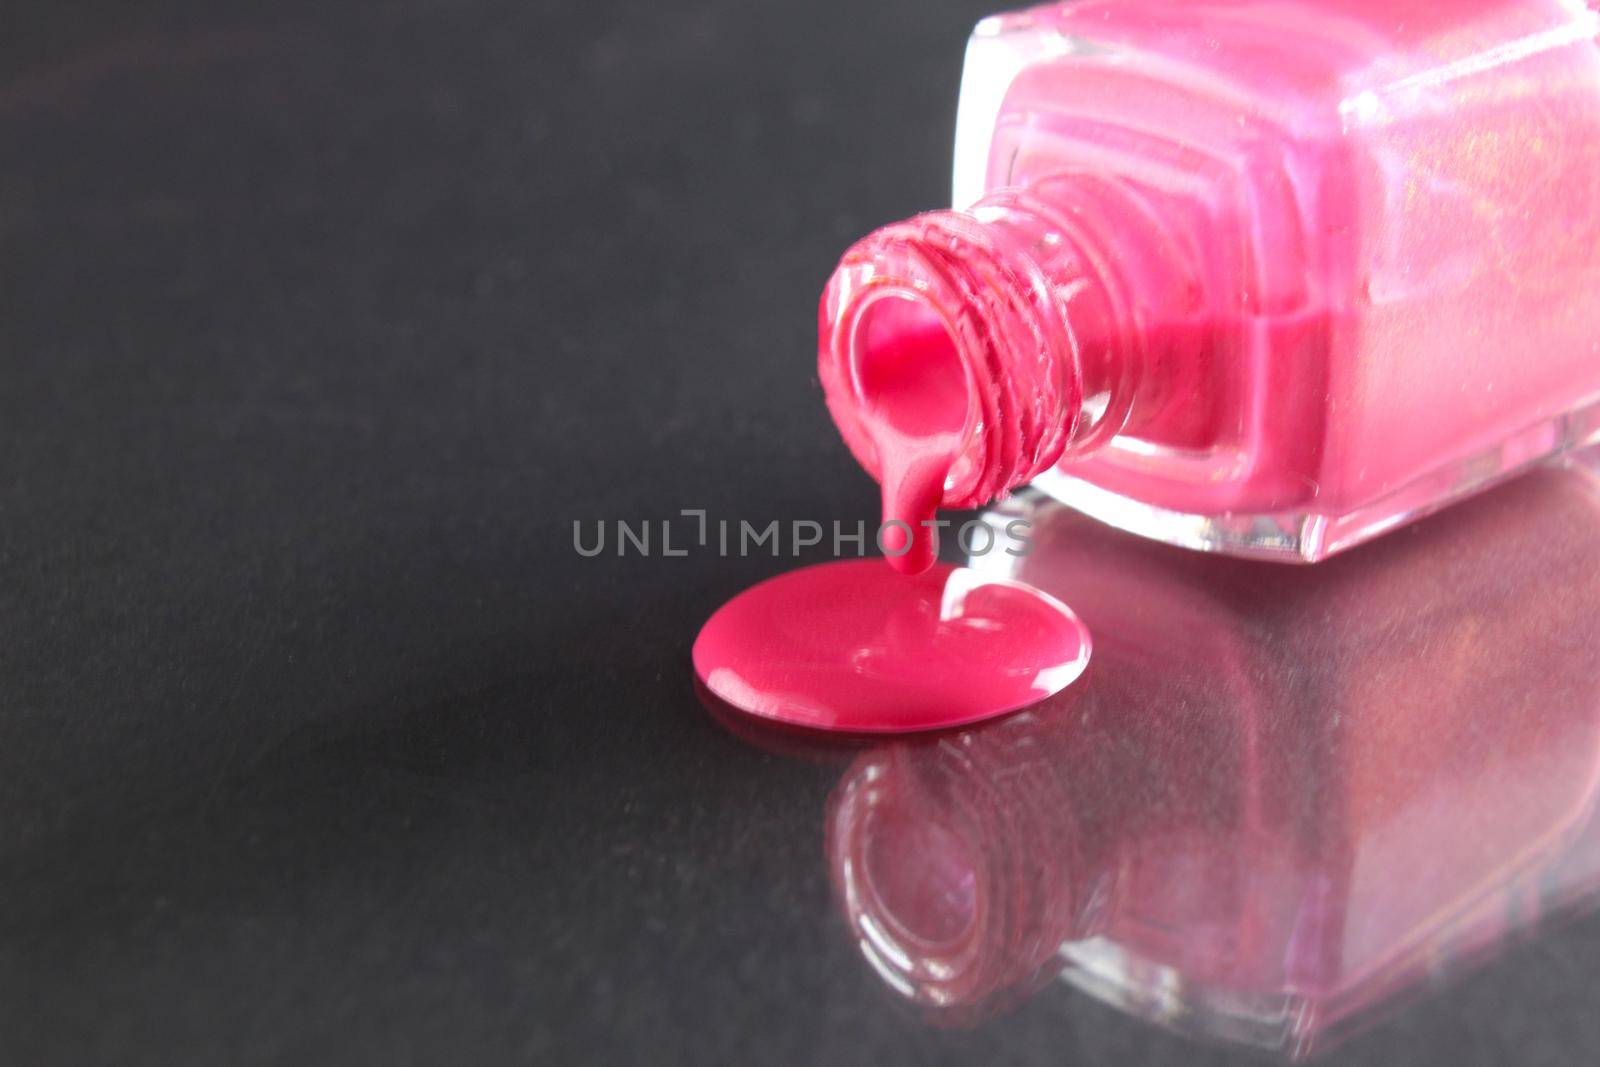 Pink nail polish is poured out of the bottle bottle on a black background with a copyspace place for text by Shoba